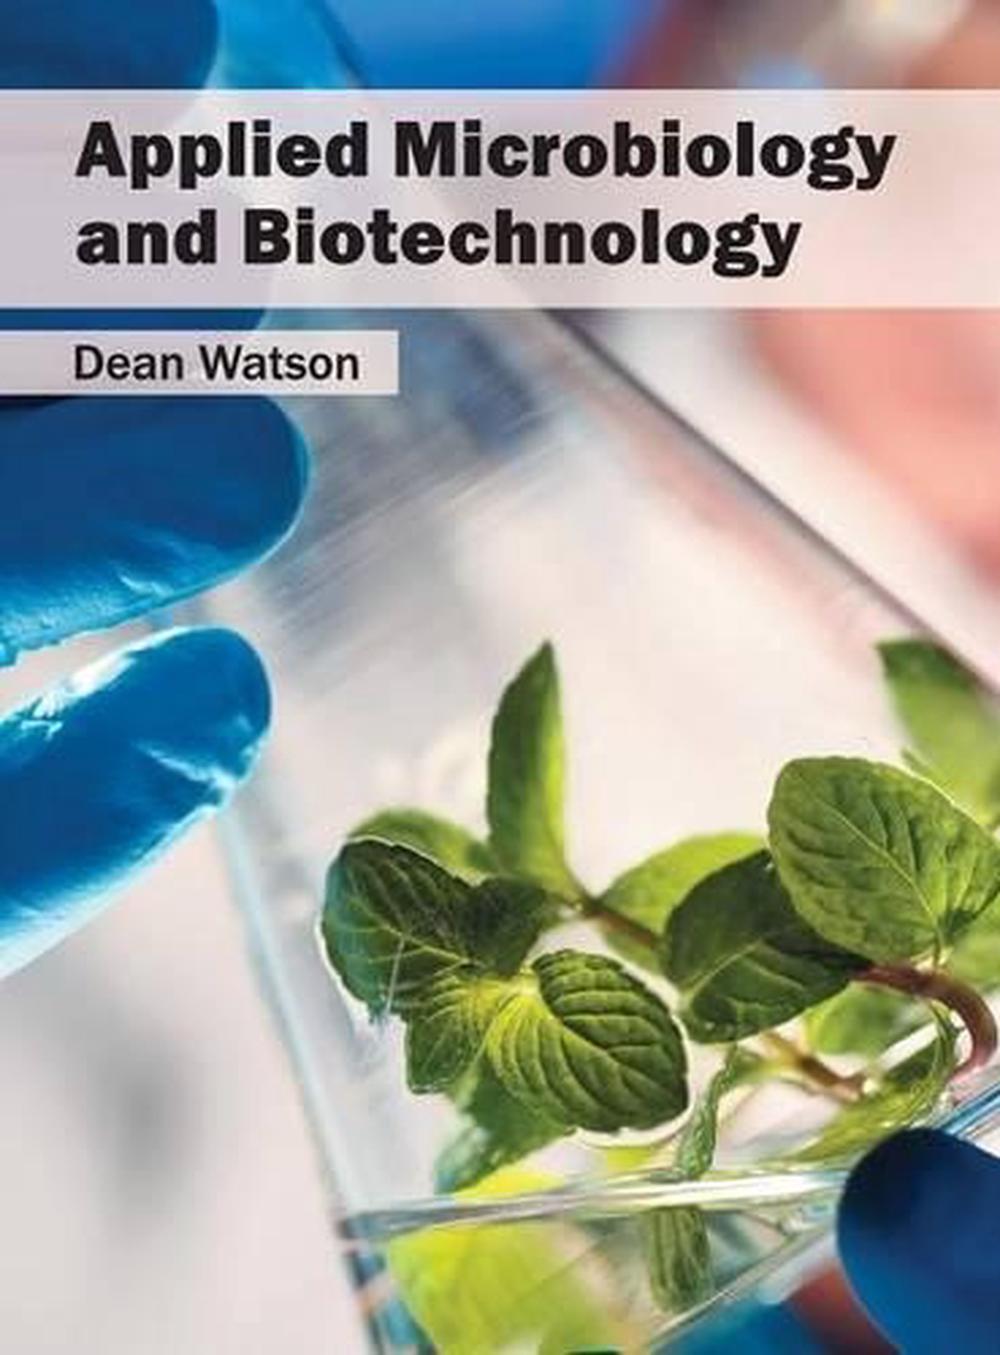 research books on biotechnology